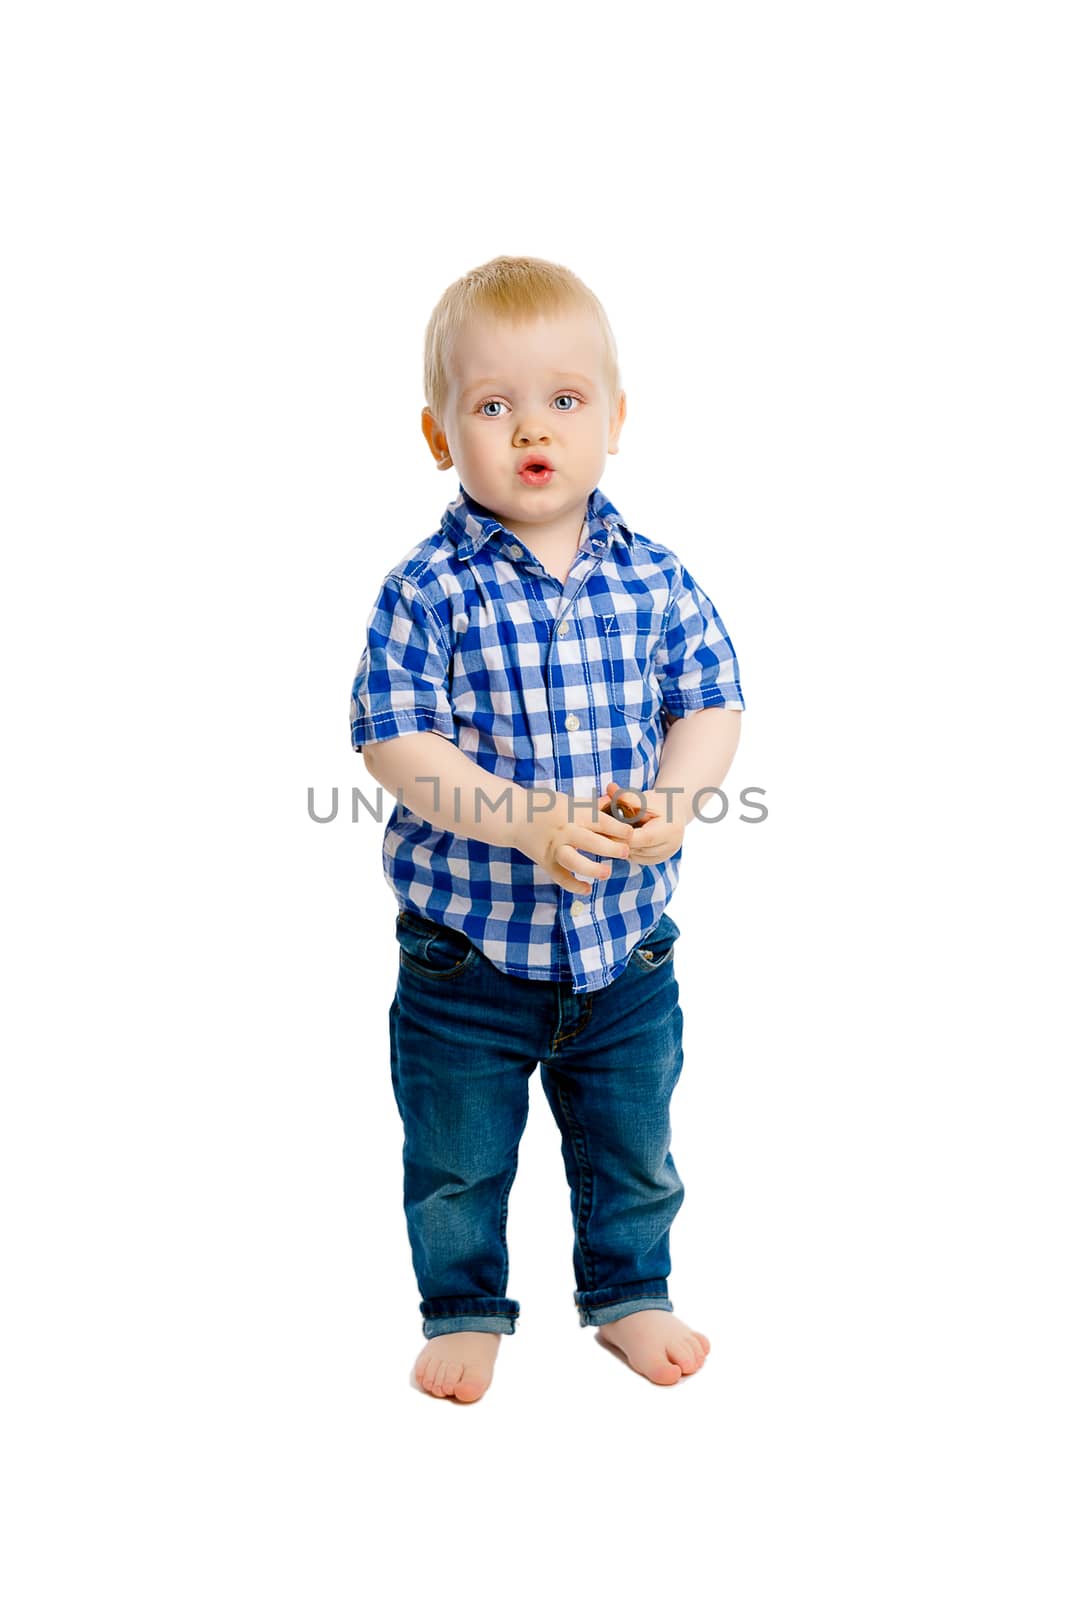 little boy in a plaid shirt and jeans by pzRomashka